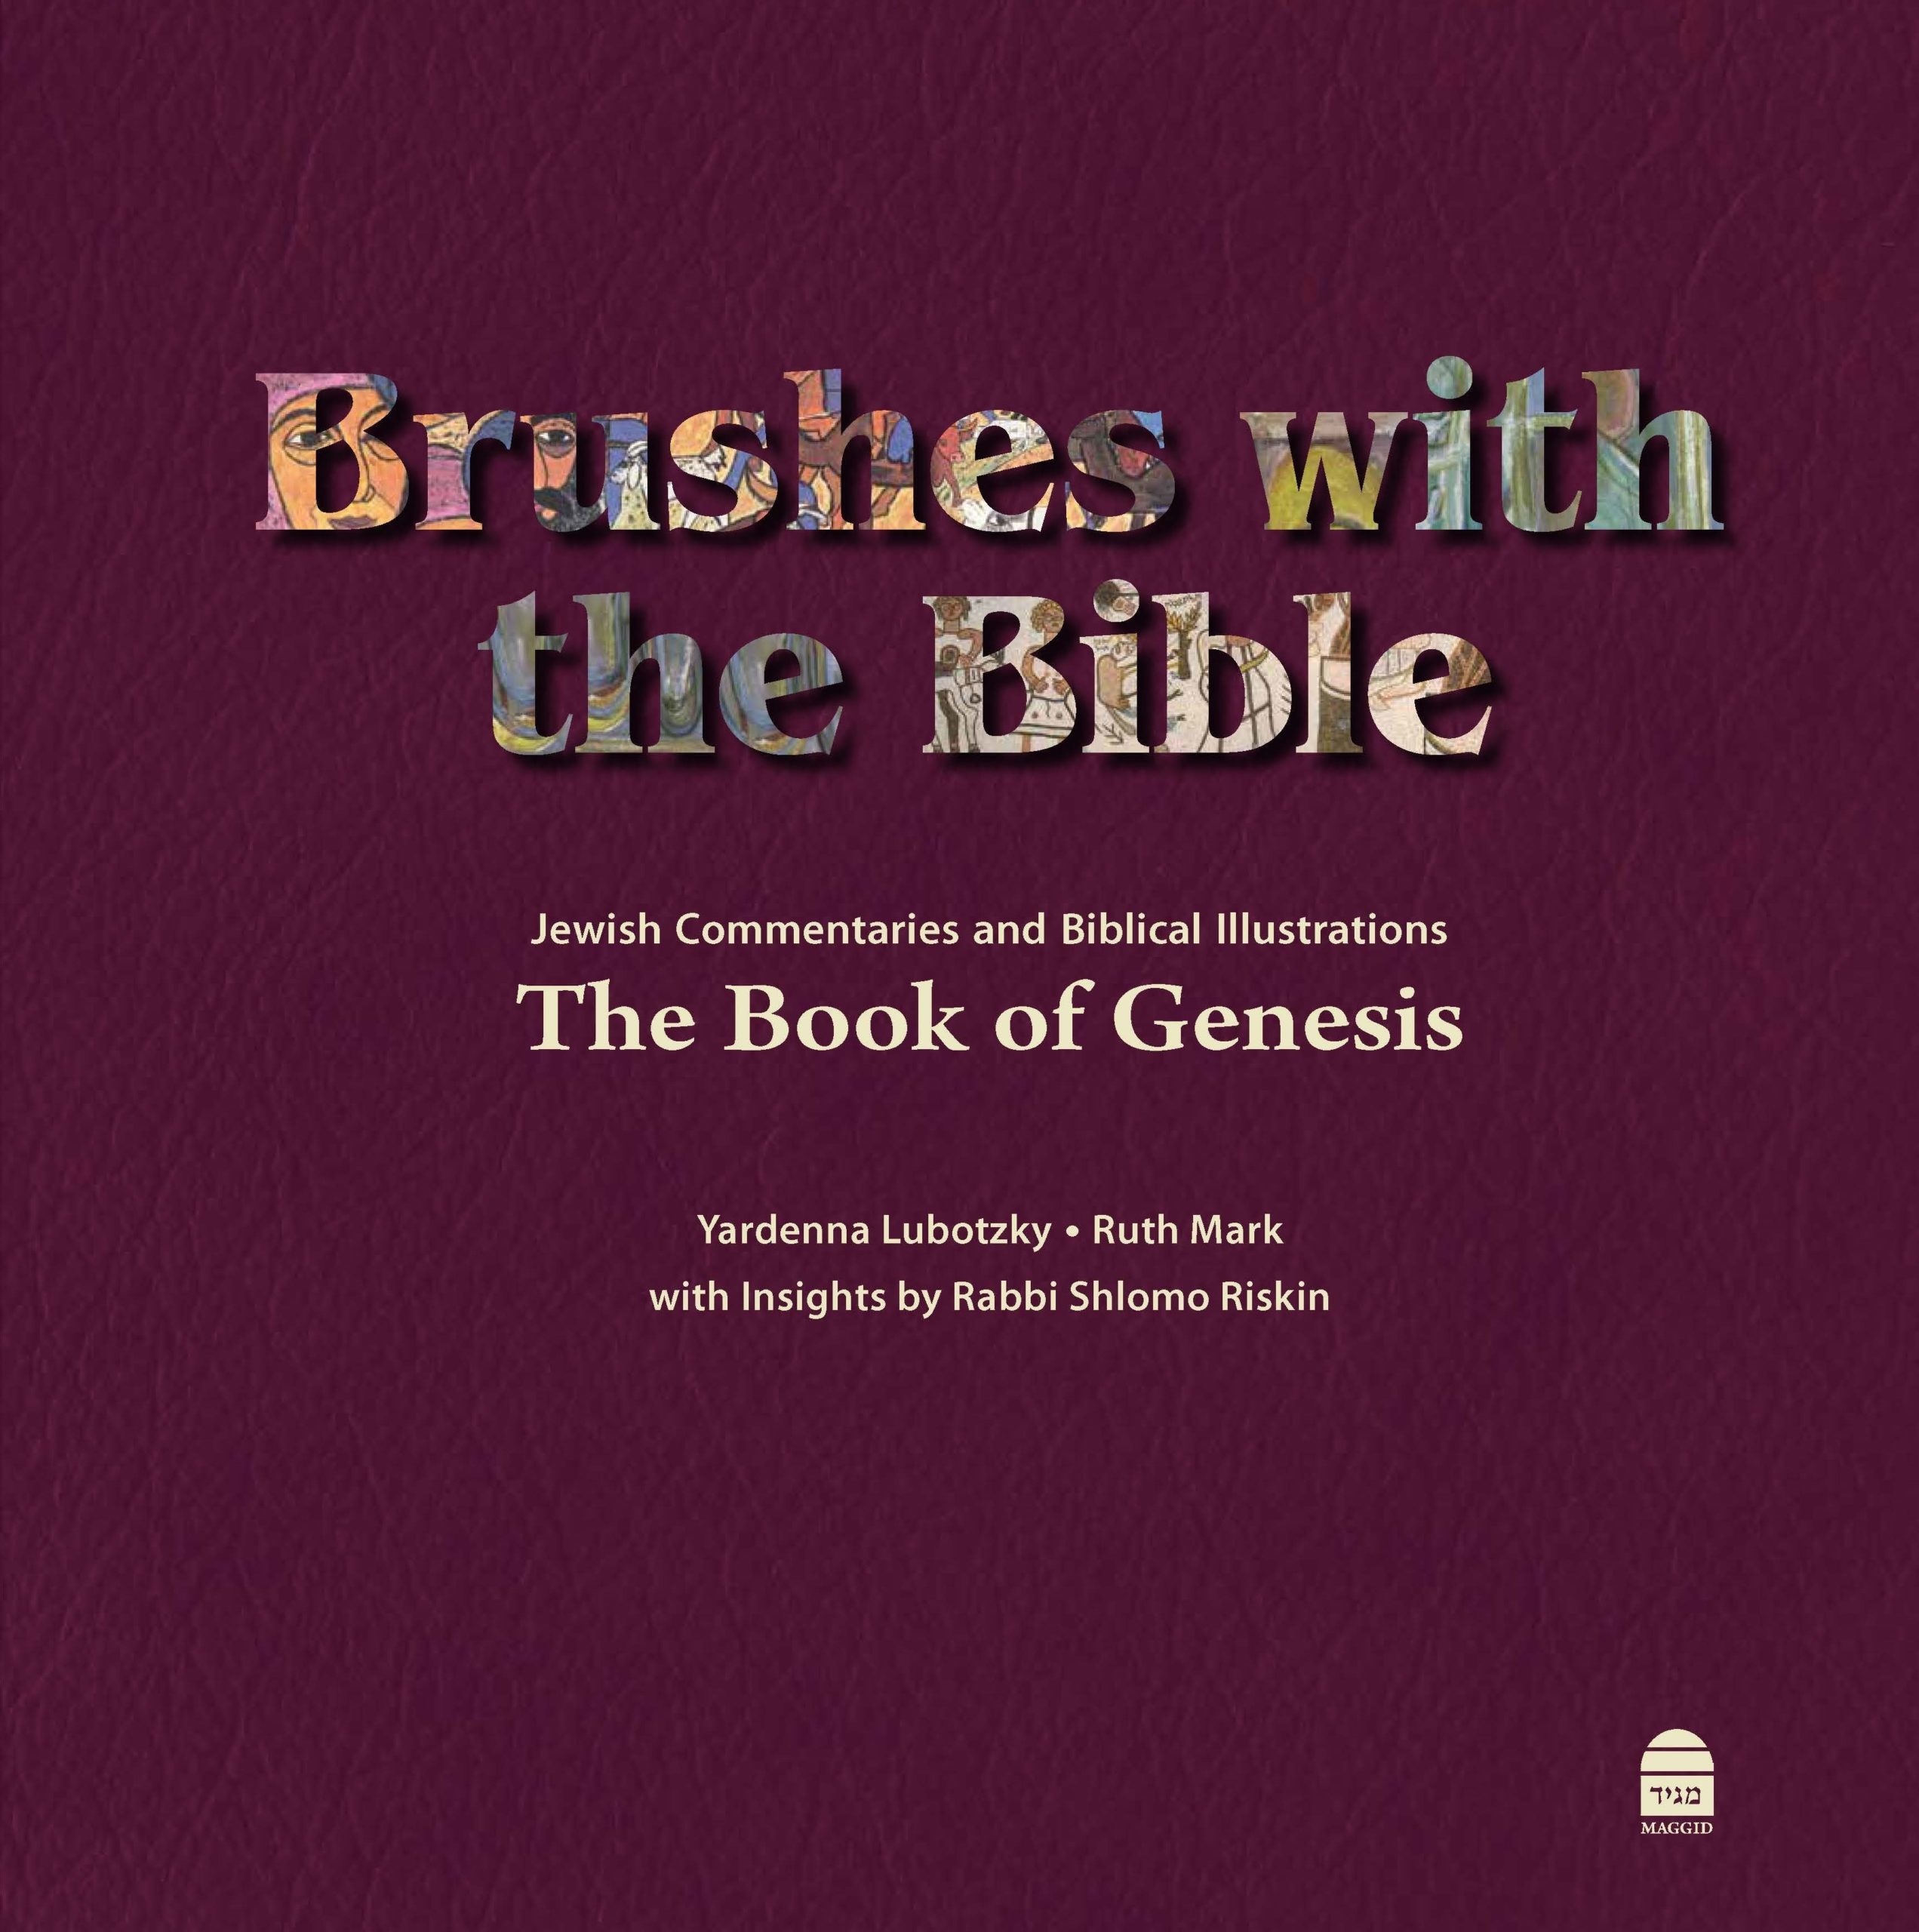 Eng Brushes With The Bible 05 Low Res Scaled 1.jpg